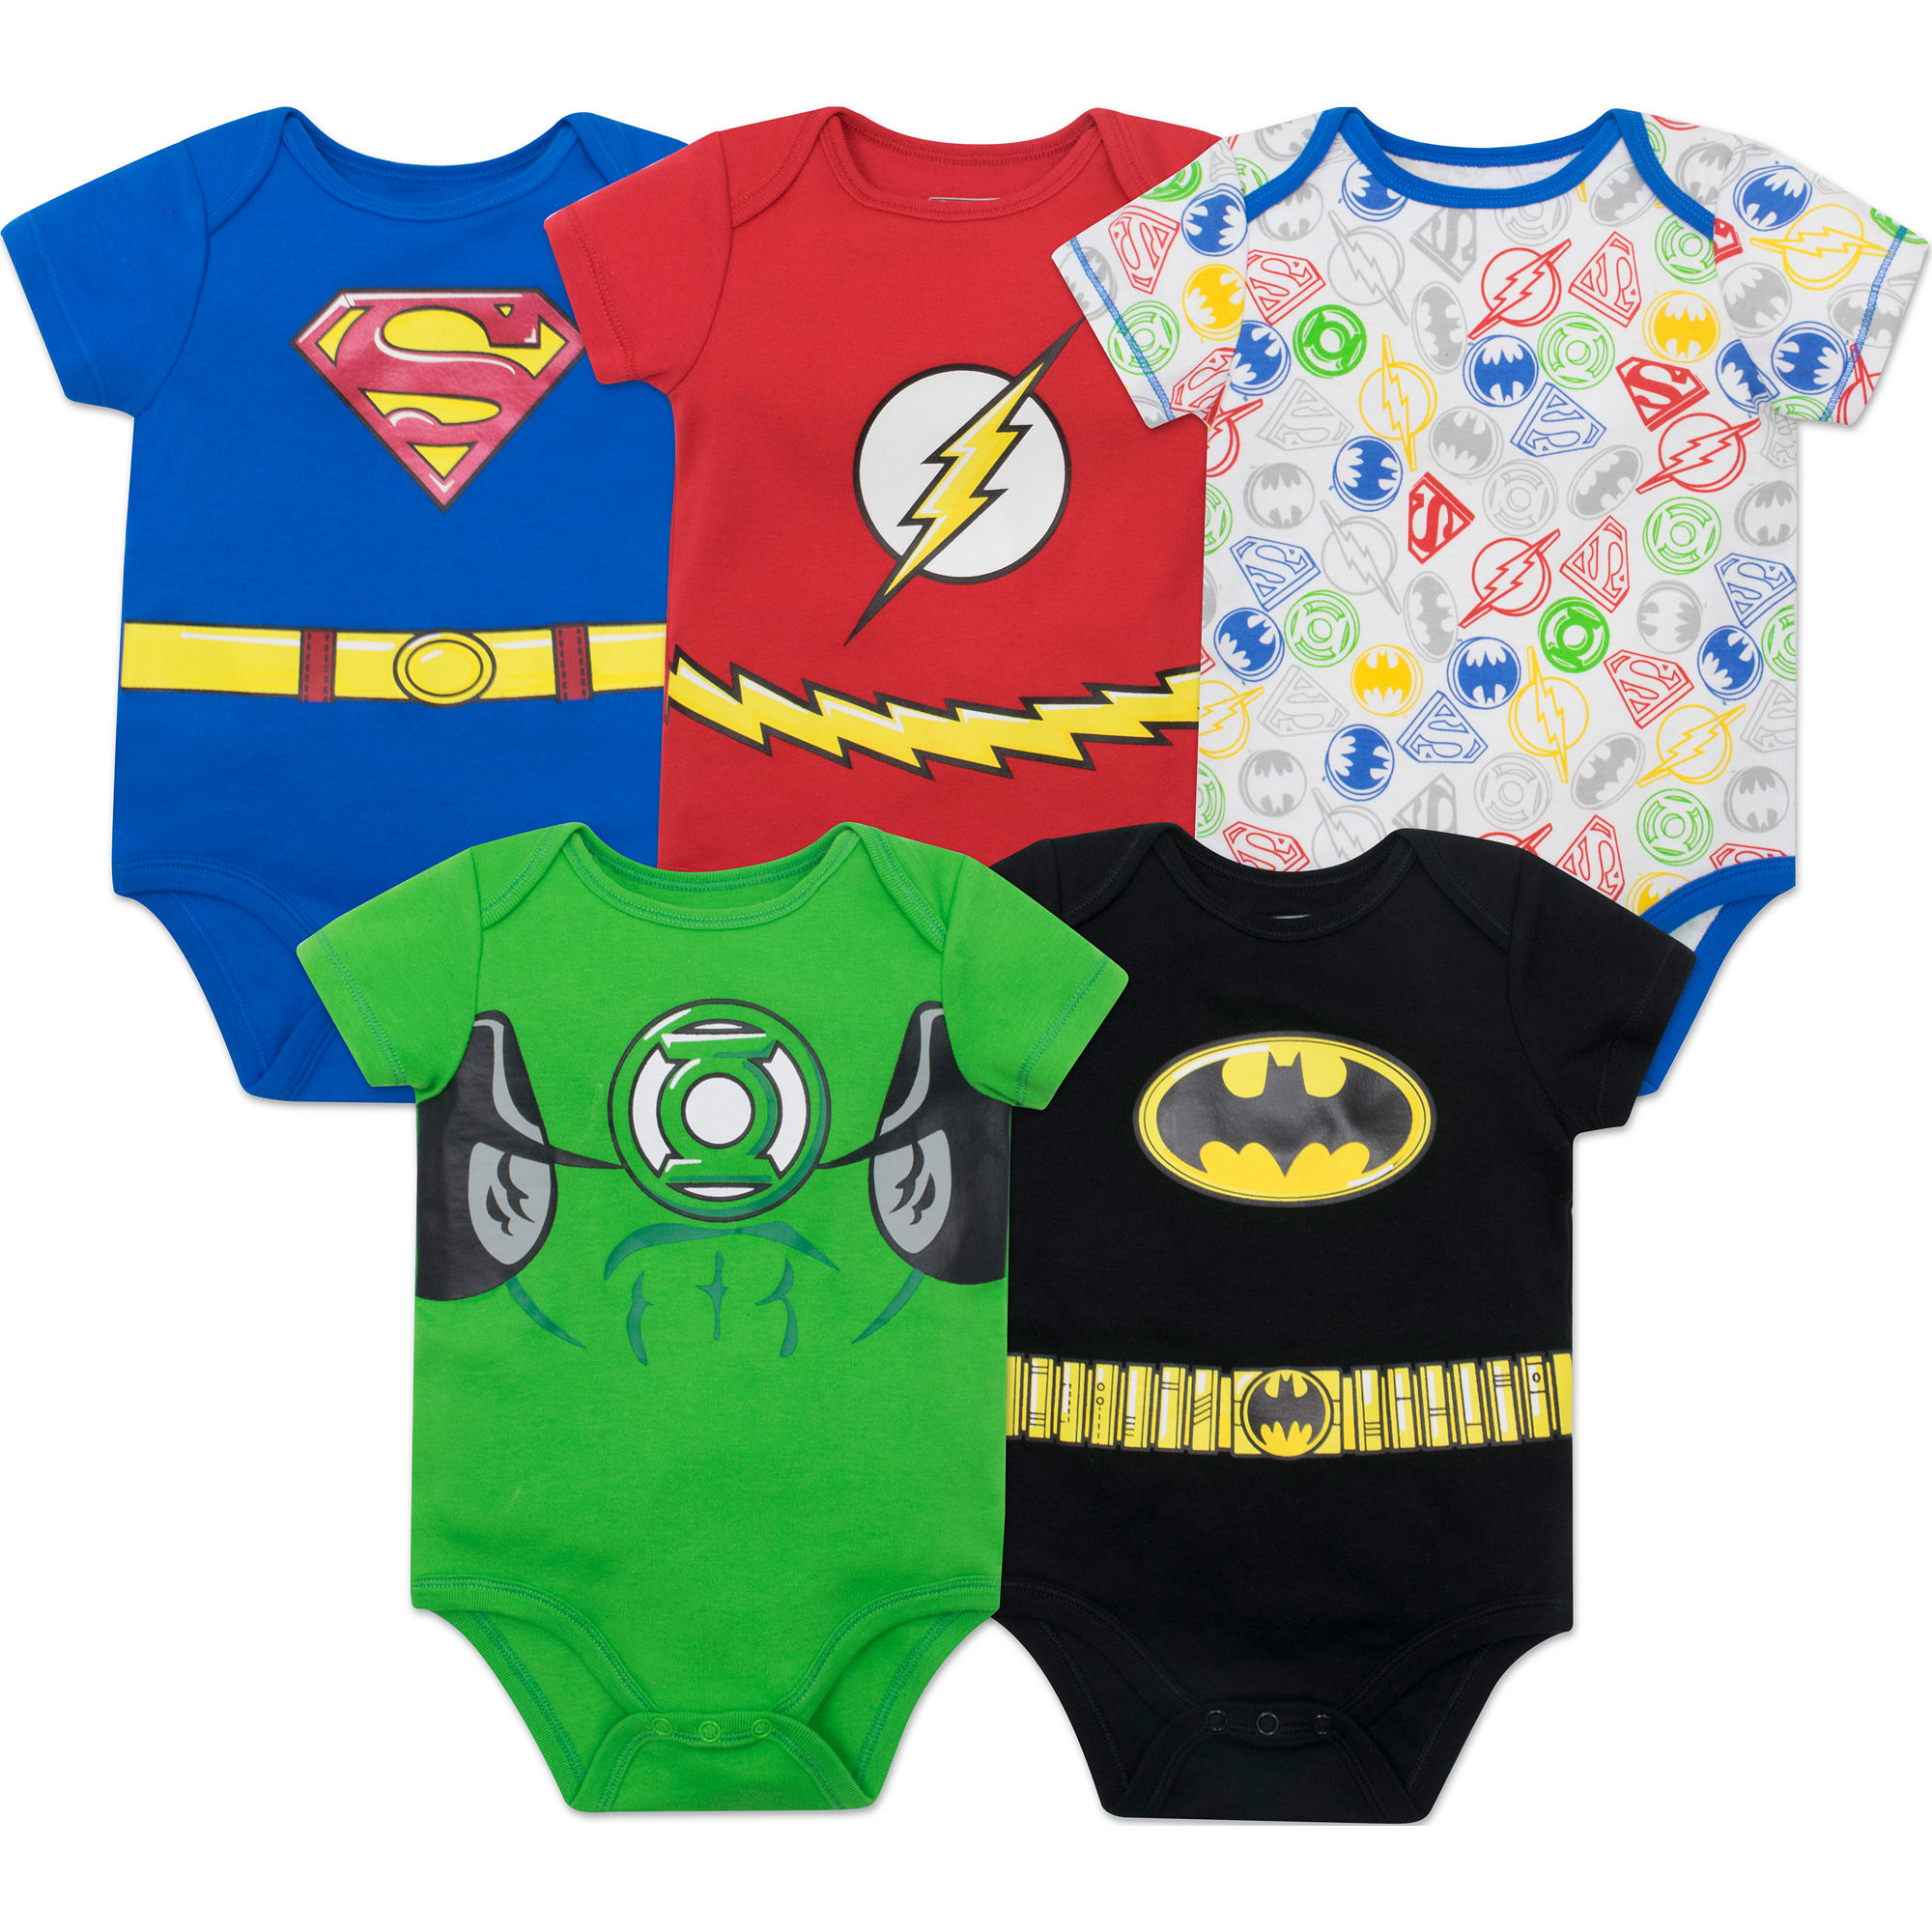 UPC 024054726068 product image for Justice League Bodysuit - Baby | upcitemdb.com